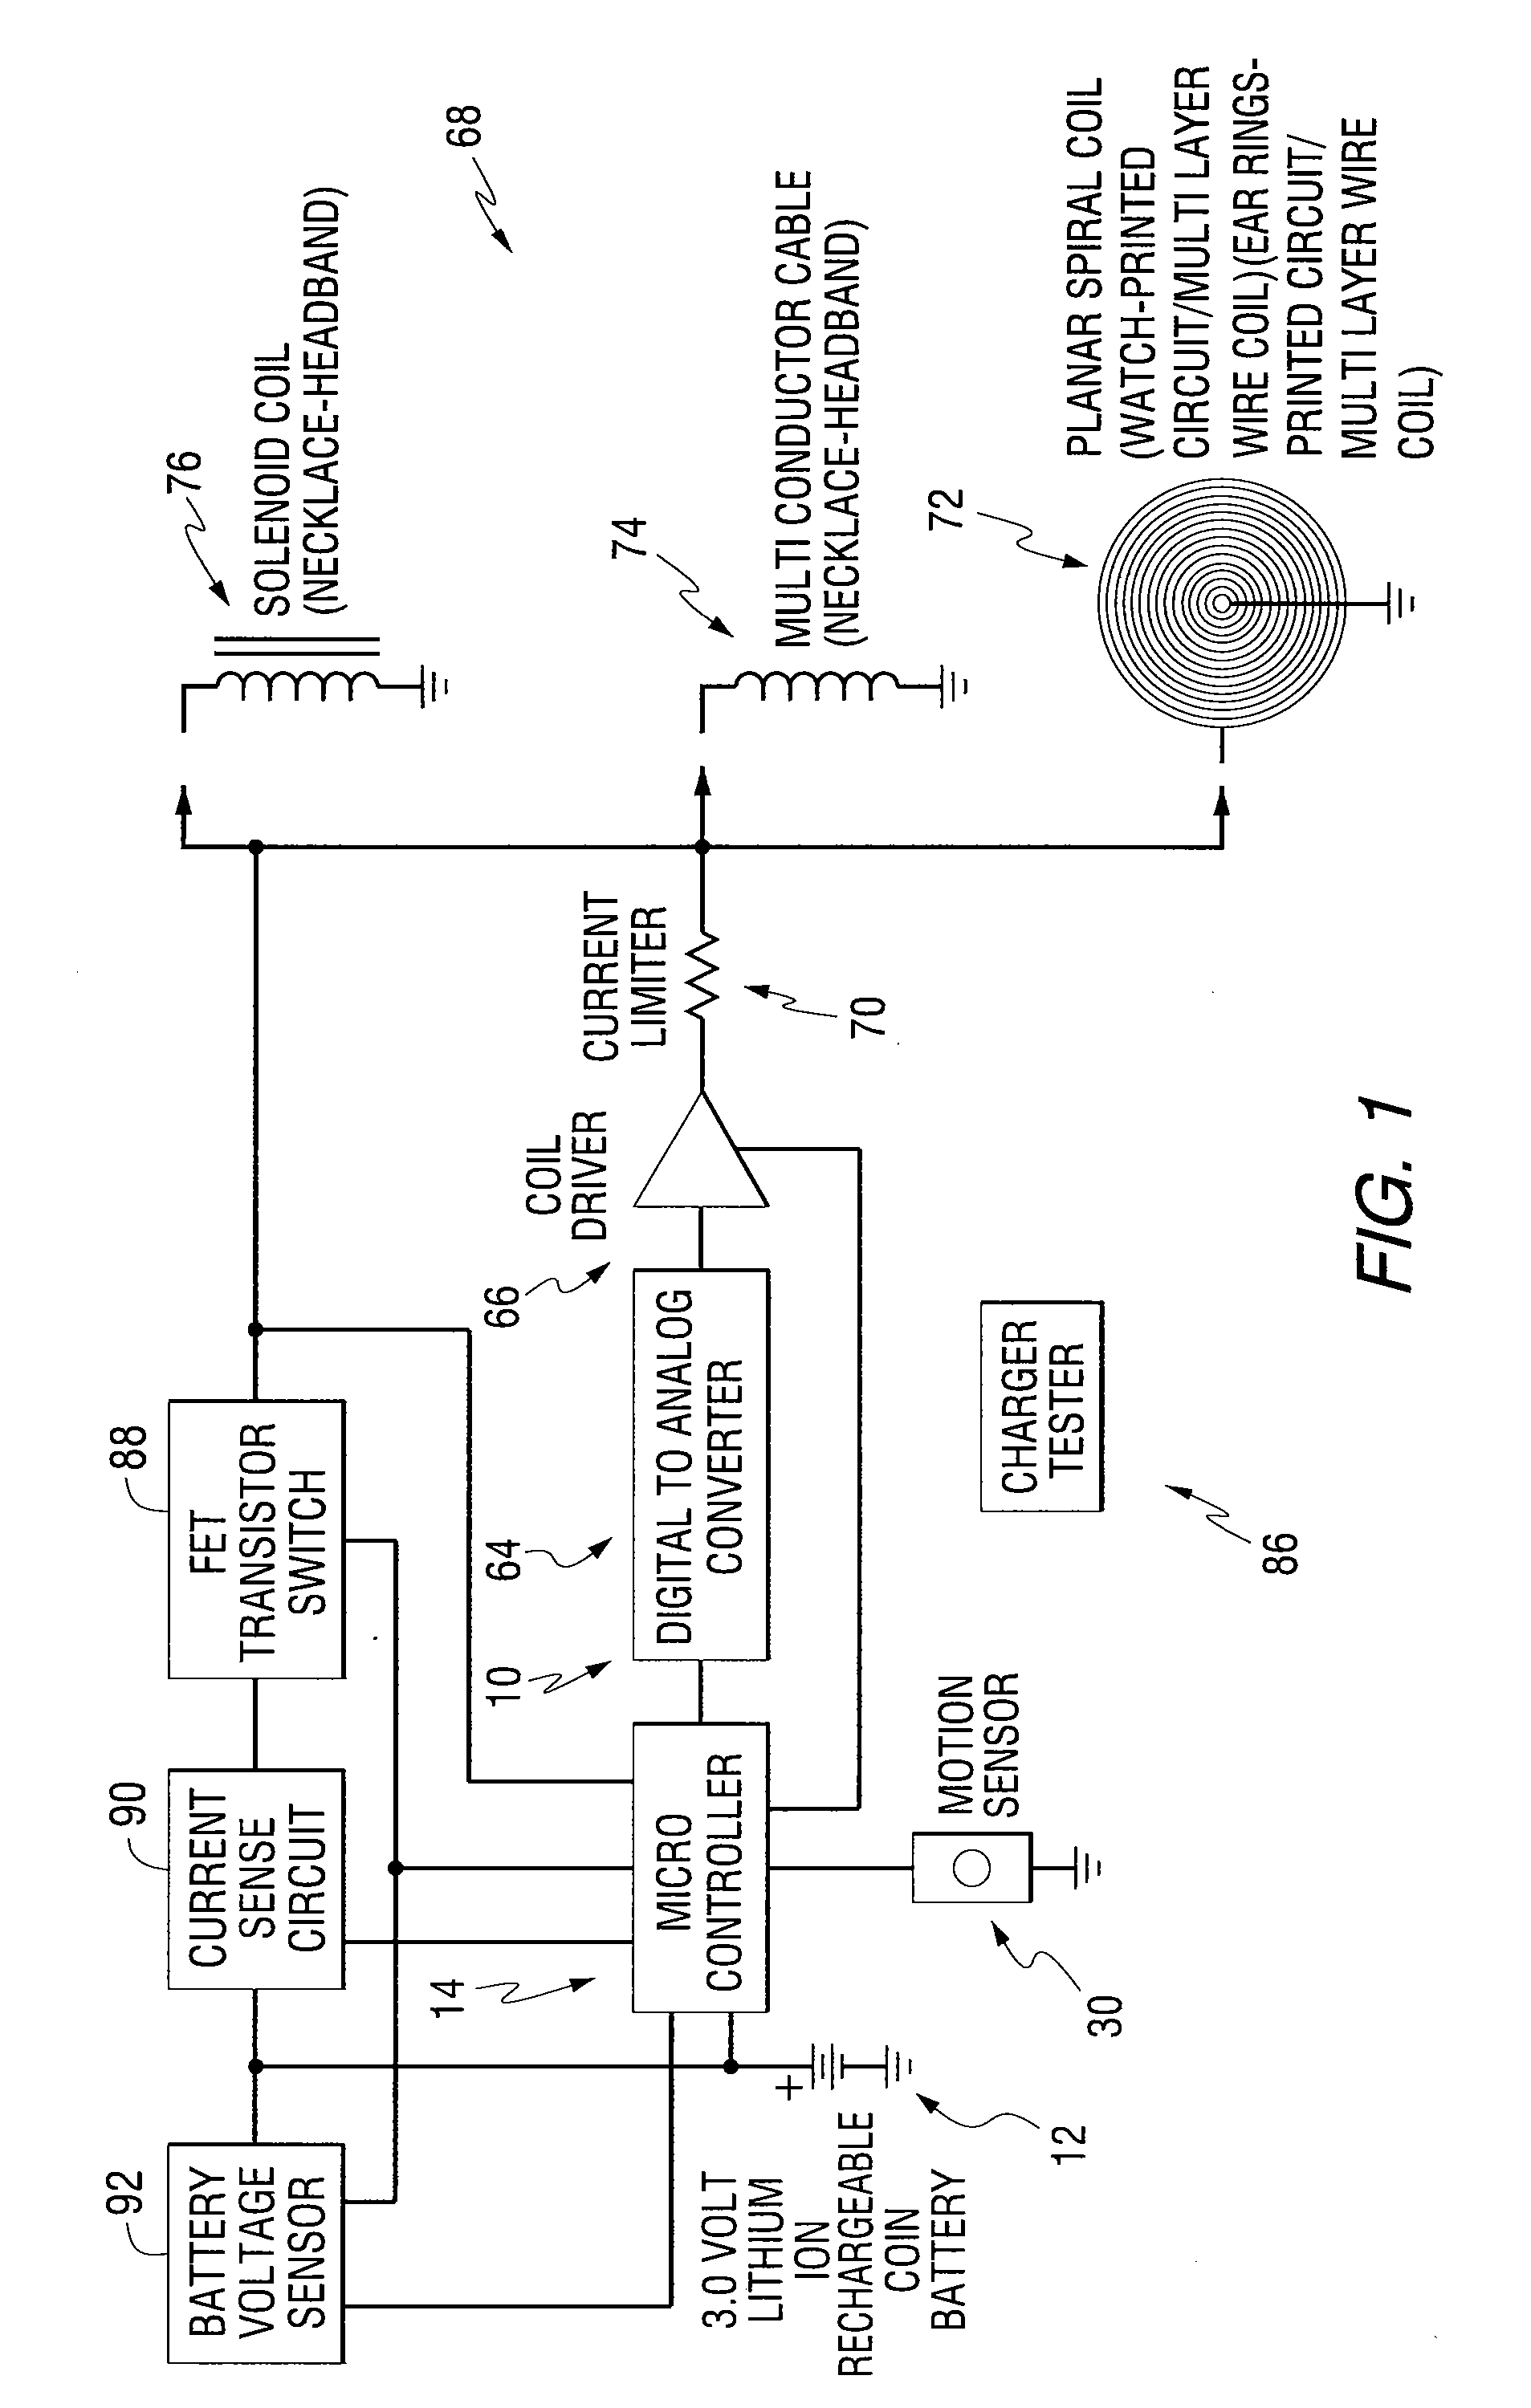 Magnetic field generator, method of generating a pulsed sinusoidal magnetic wave and magnetic field generator system